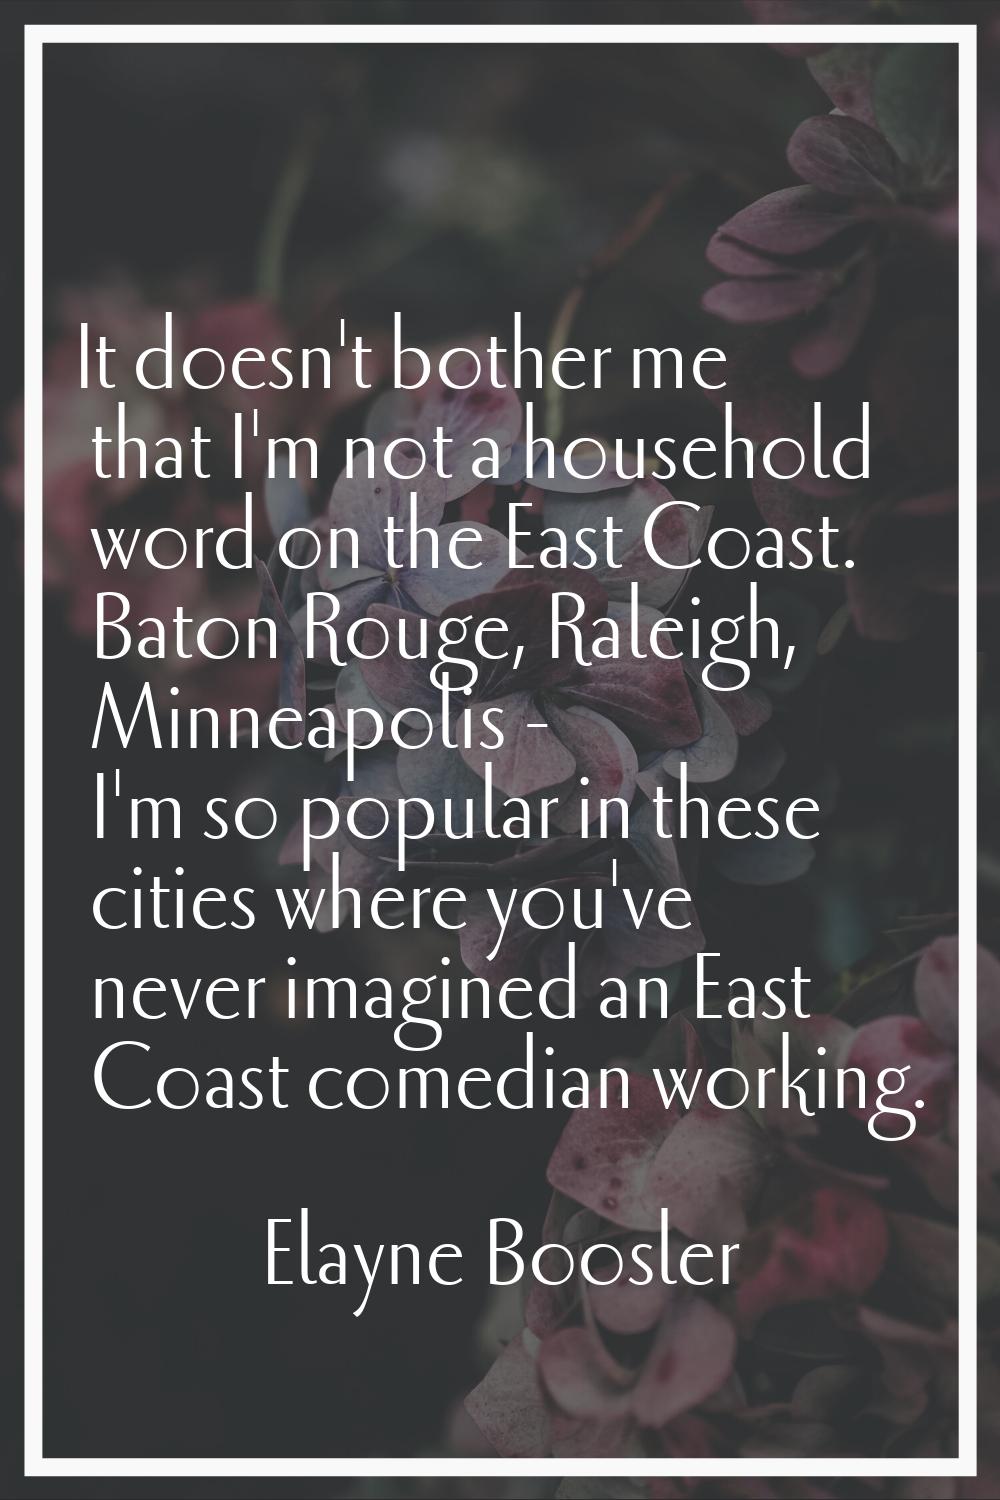 It doesn't bother me that I'm not a household word on the East Coast. Baton Rouge, Raleigh, Minneap